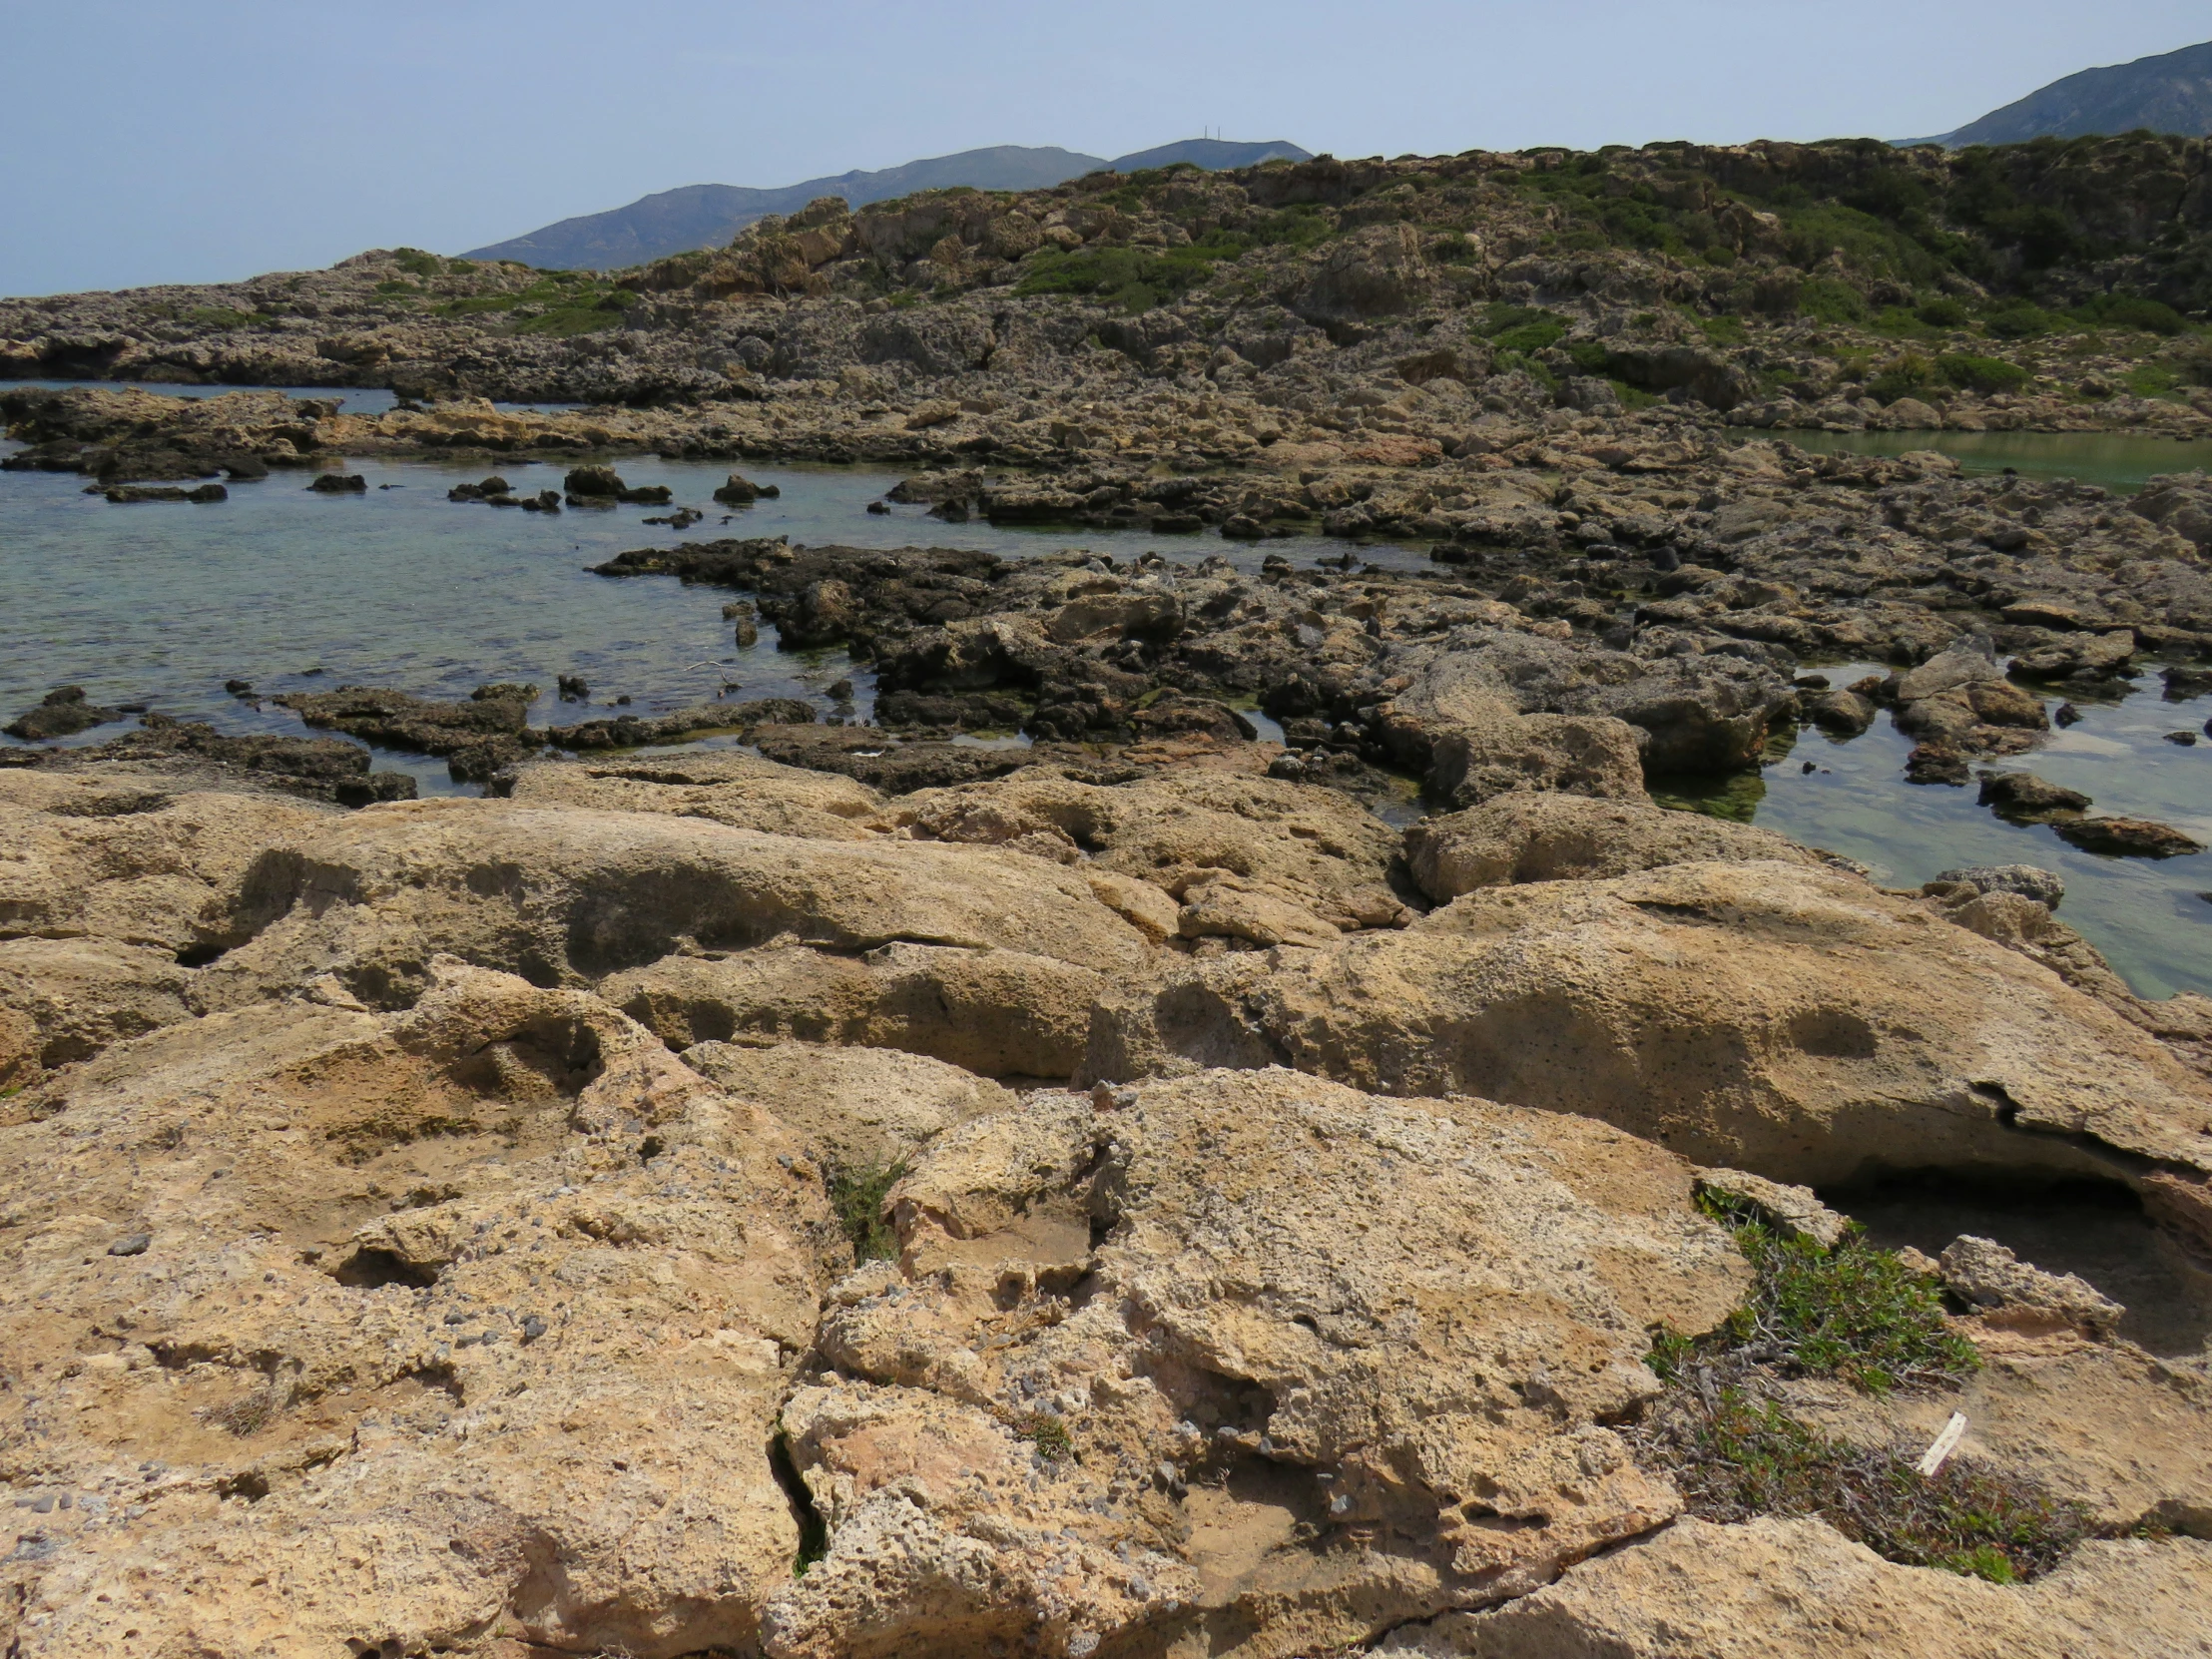 there is some water and rock pools with mountains in the background